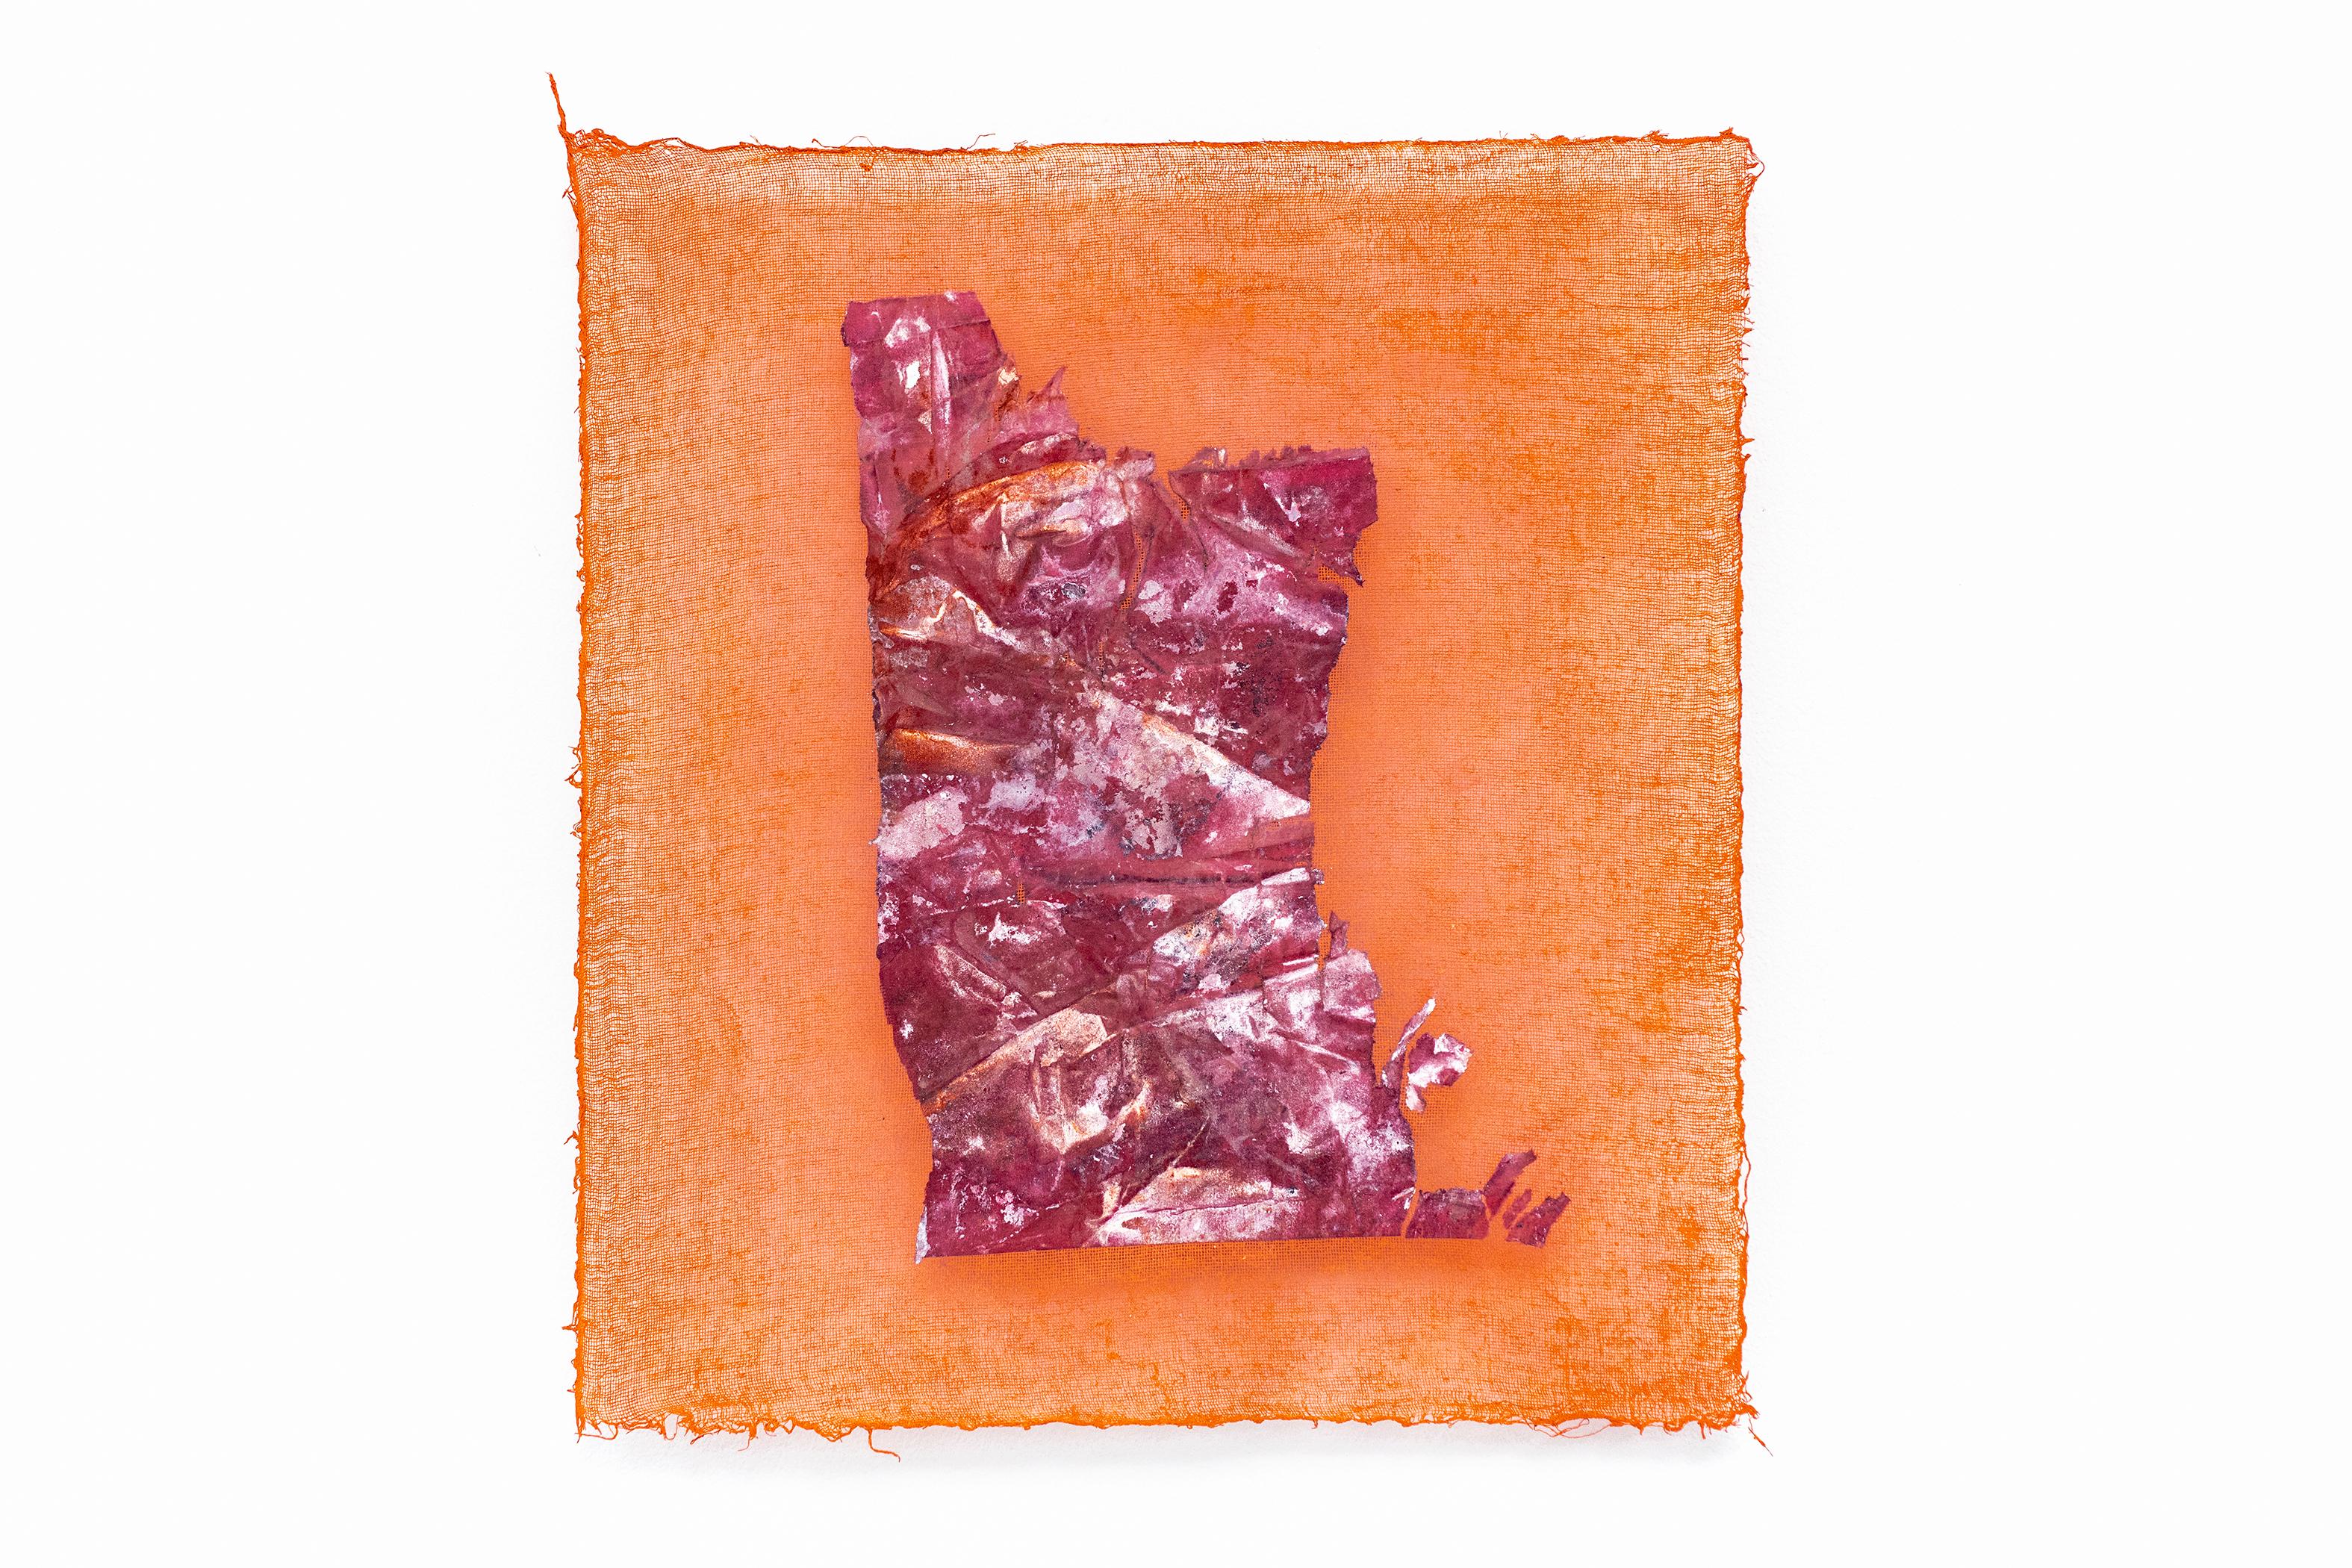 Meat, Mulberry paper and acrylic on gauze - Painting by Xinyi Liu